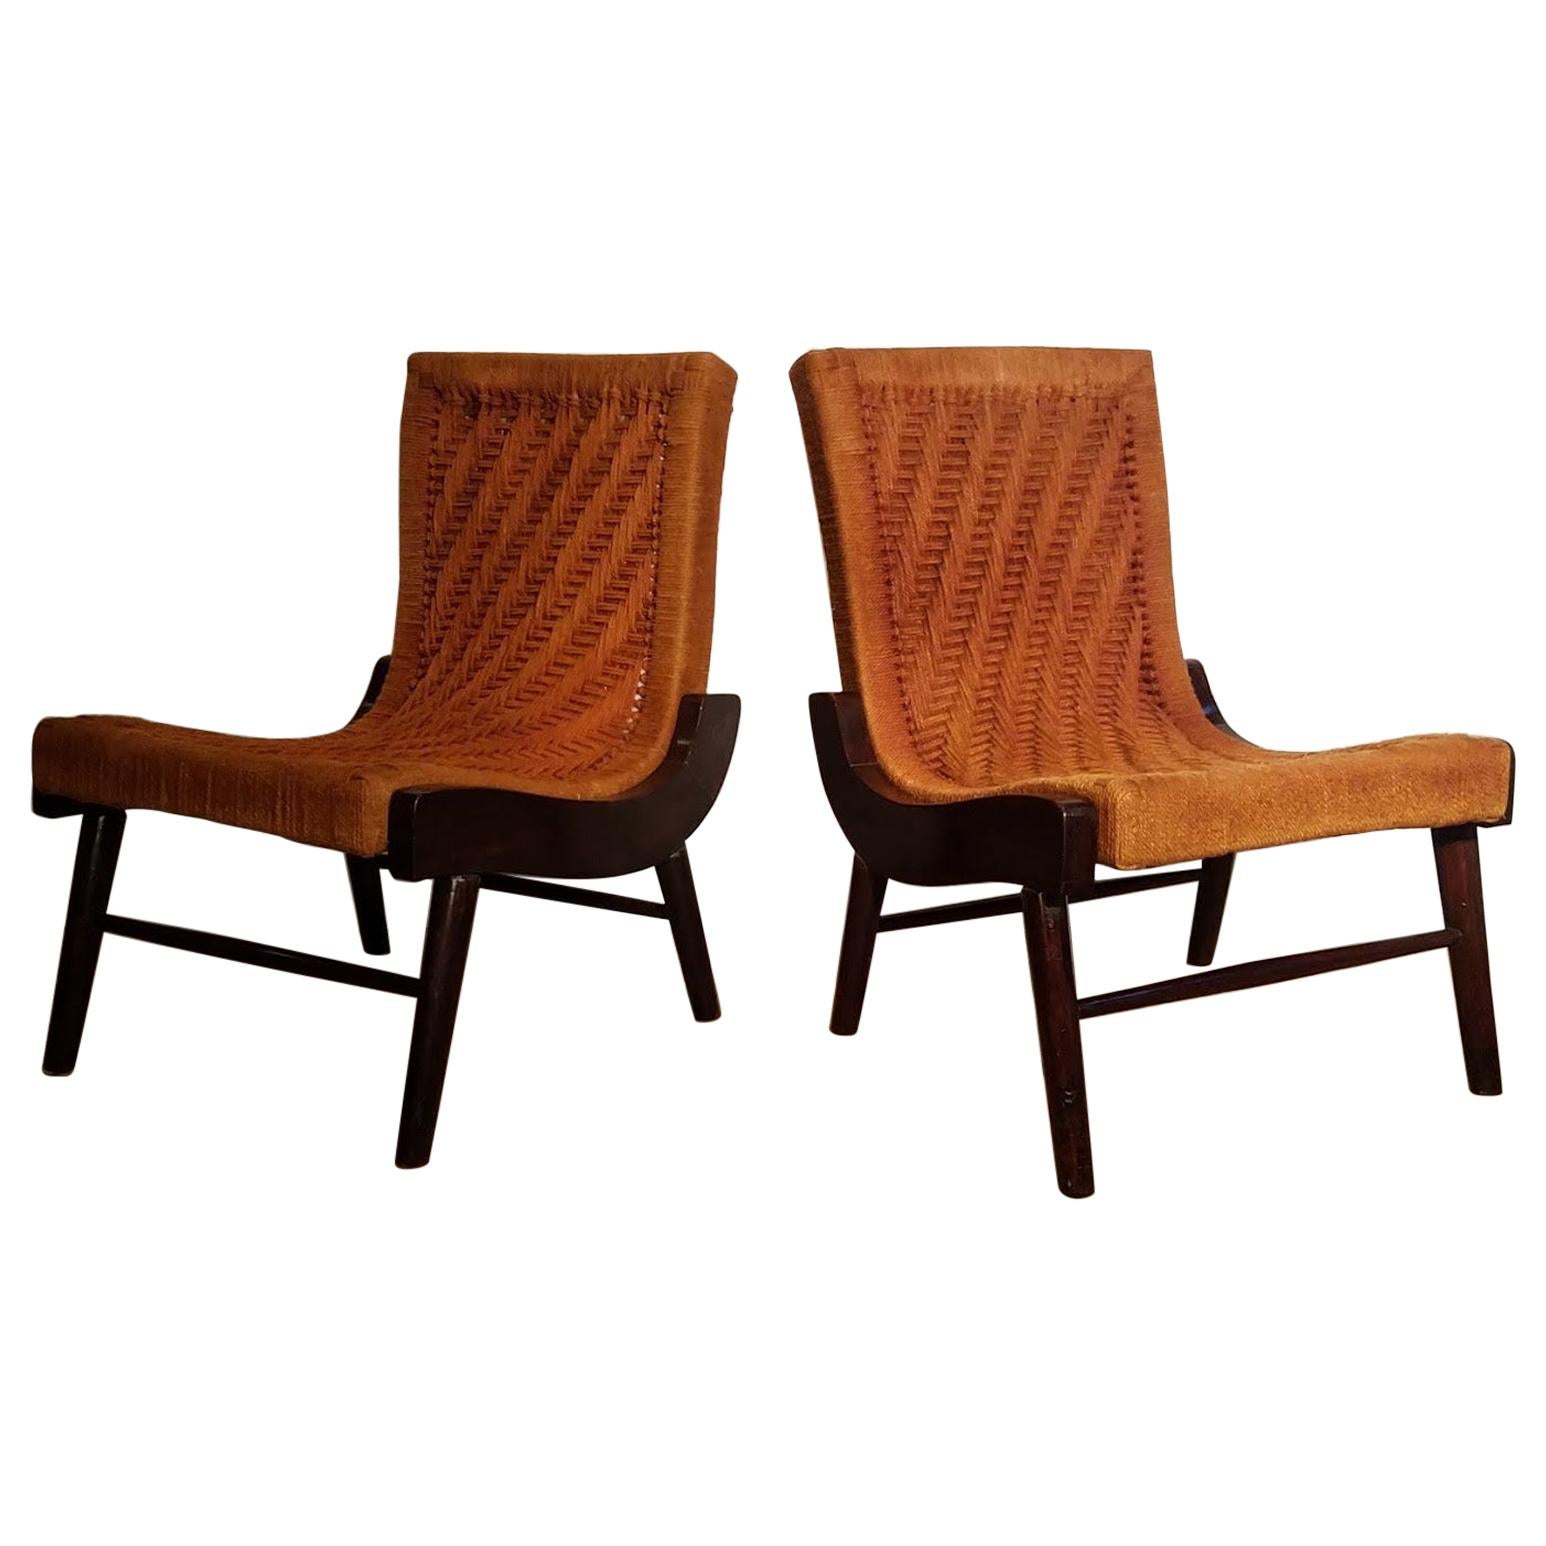 Pair of Cocobolo Rosewood and Hemp Cord 1940s Lounge Chairs Rare For Sale